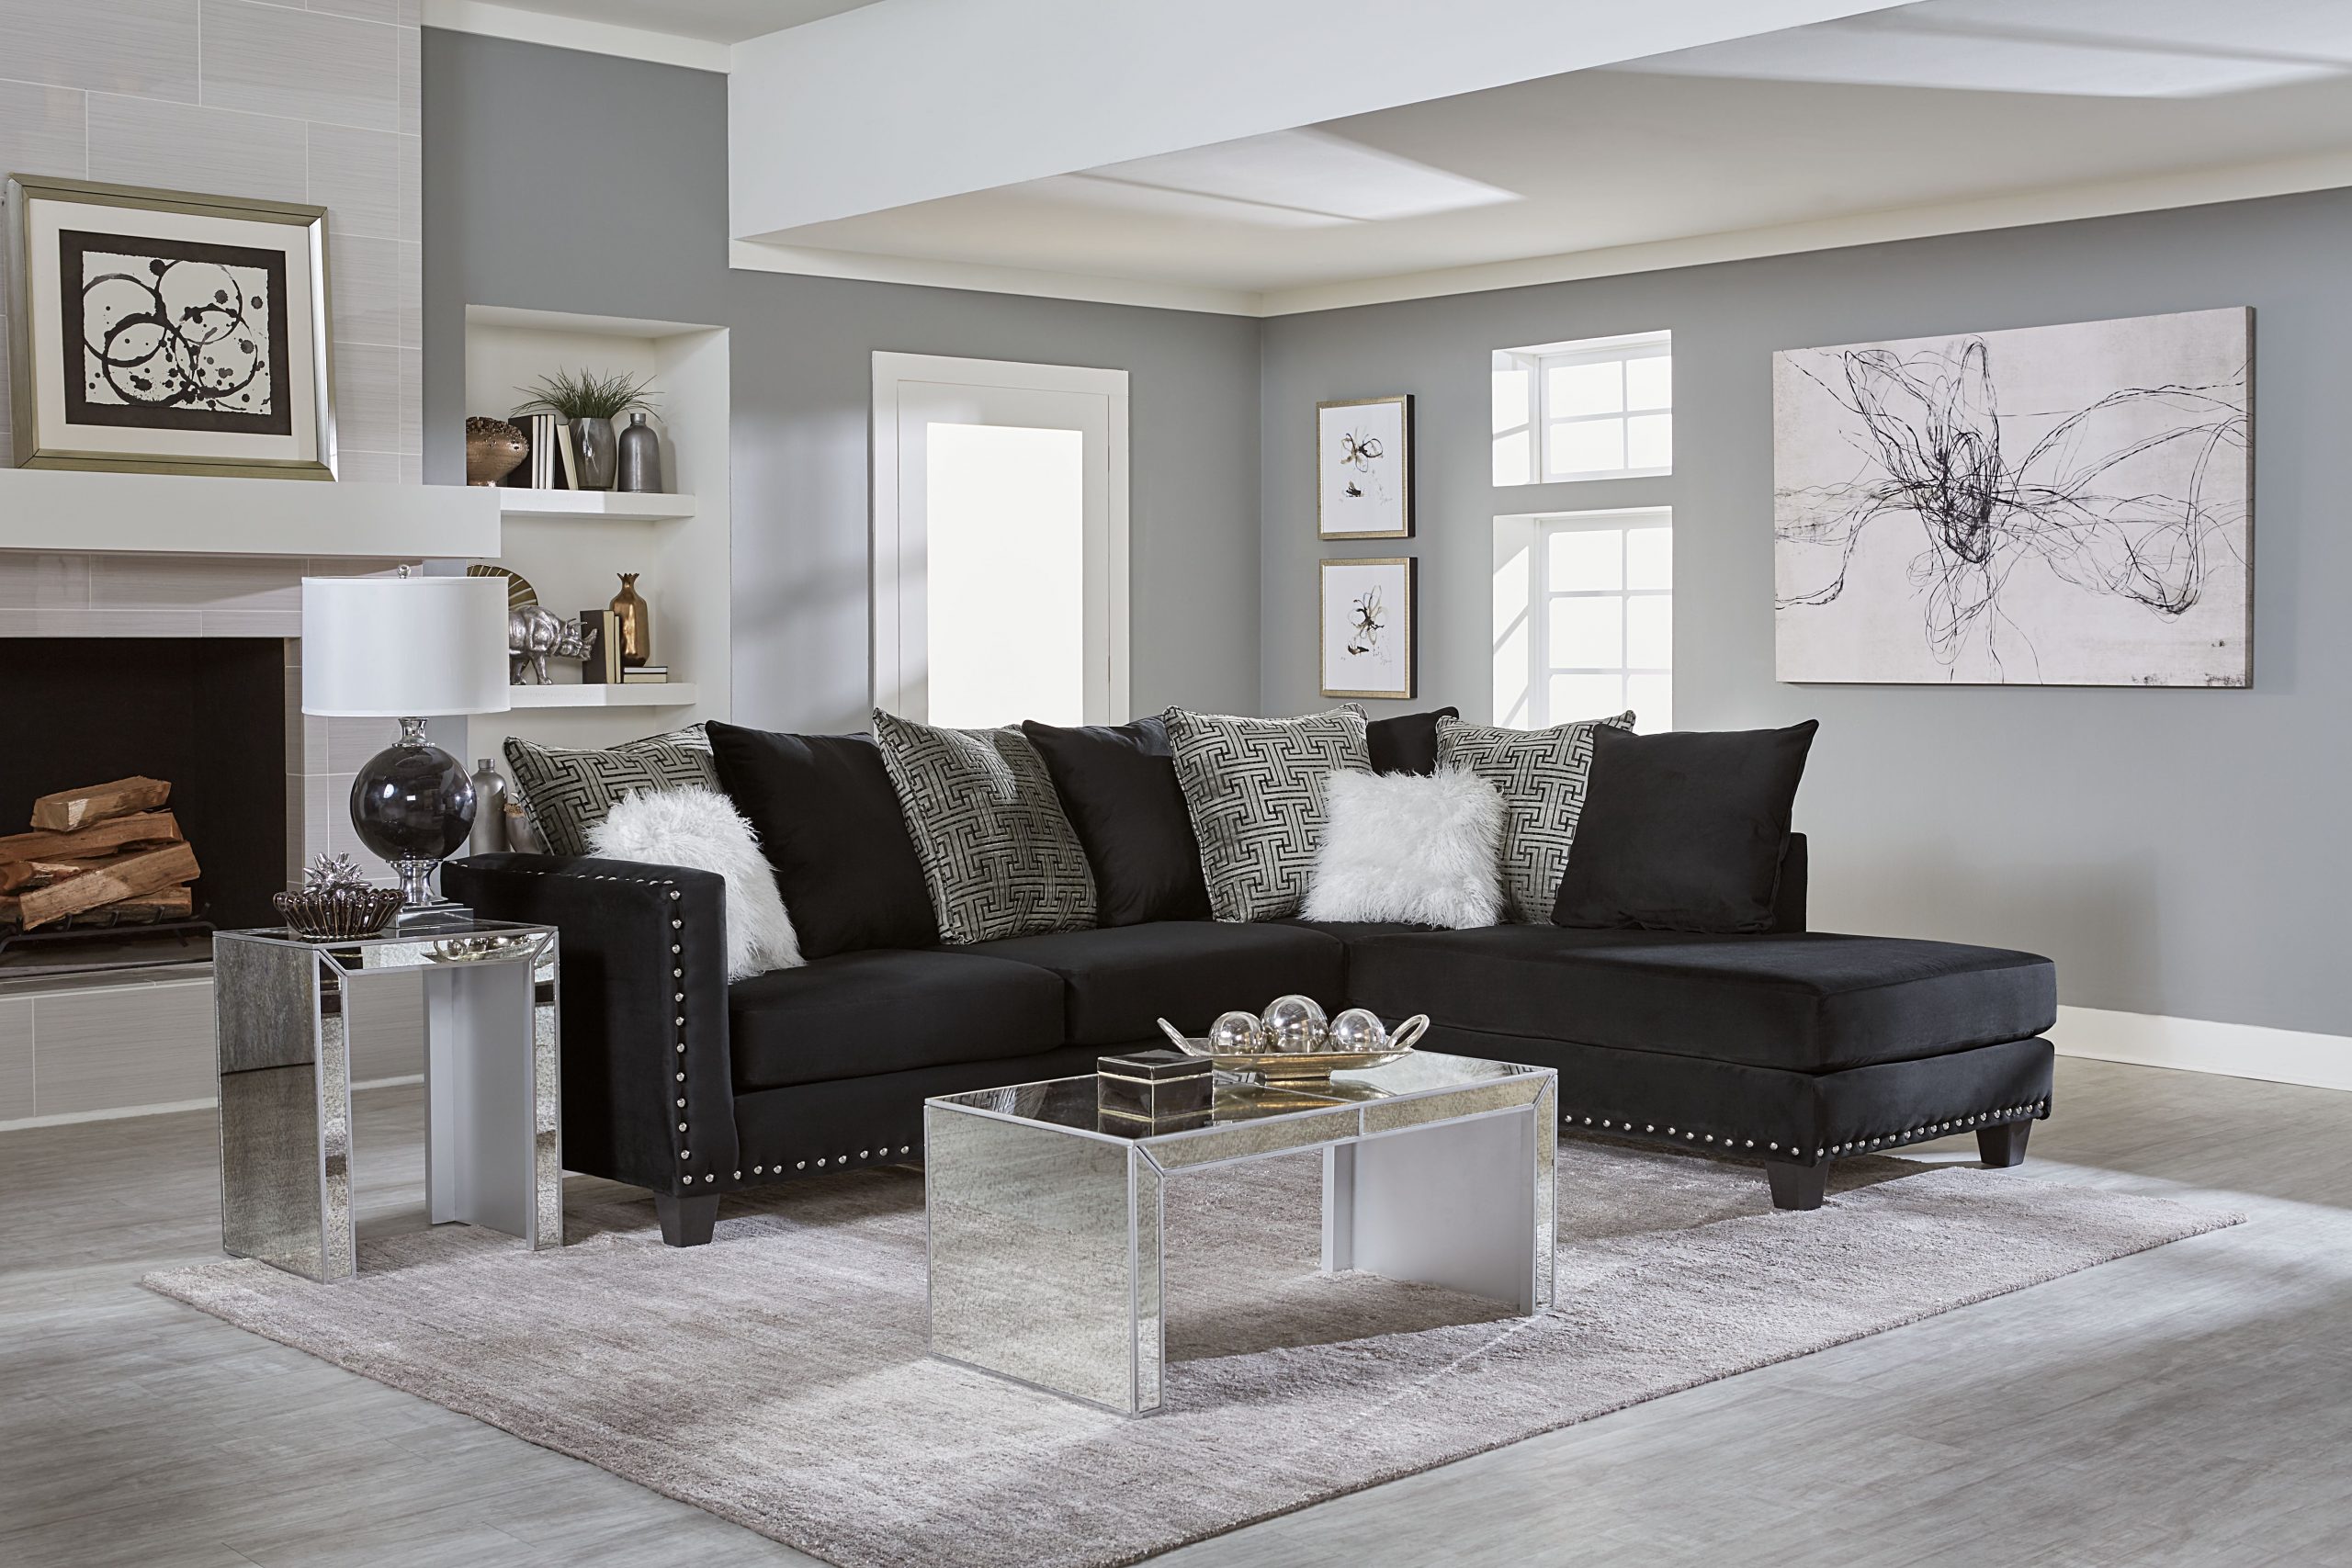 STATIONARY SECTIONAL LIVING ROOM